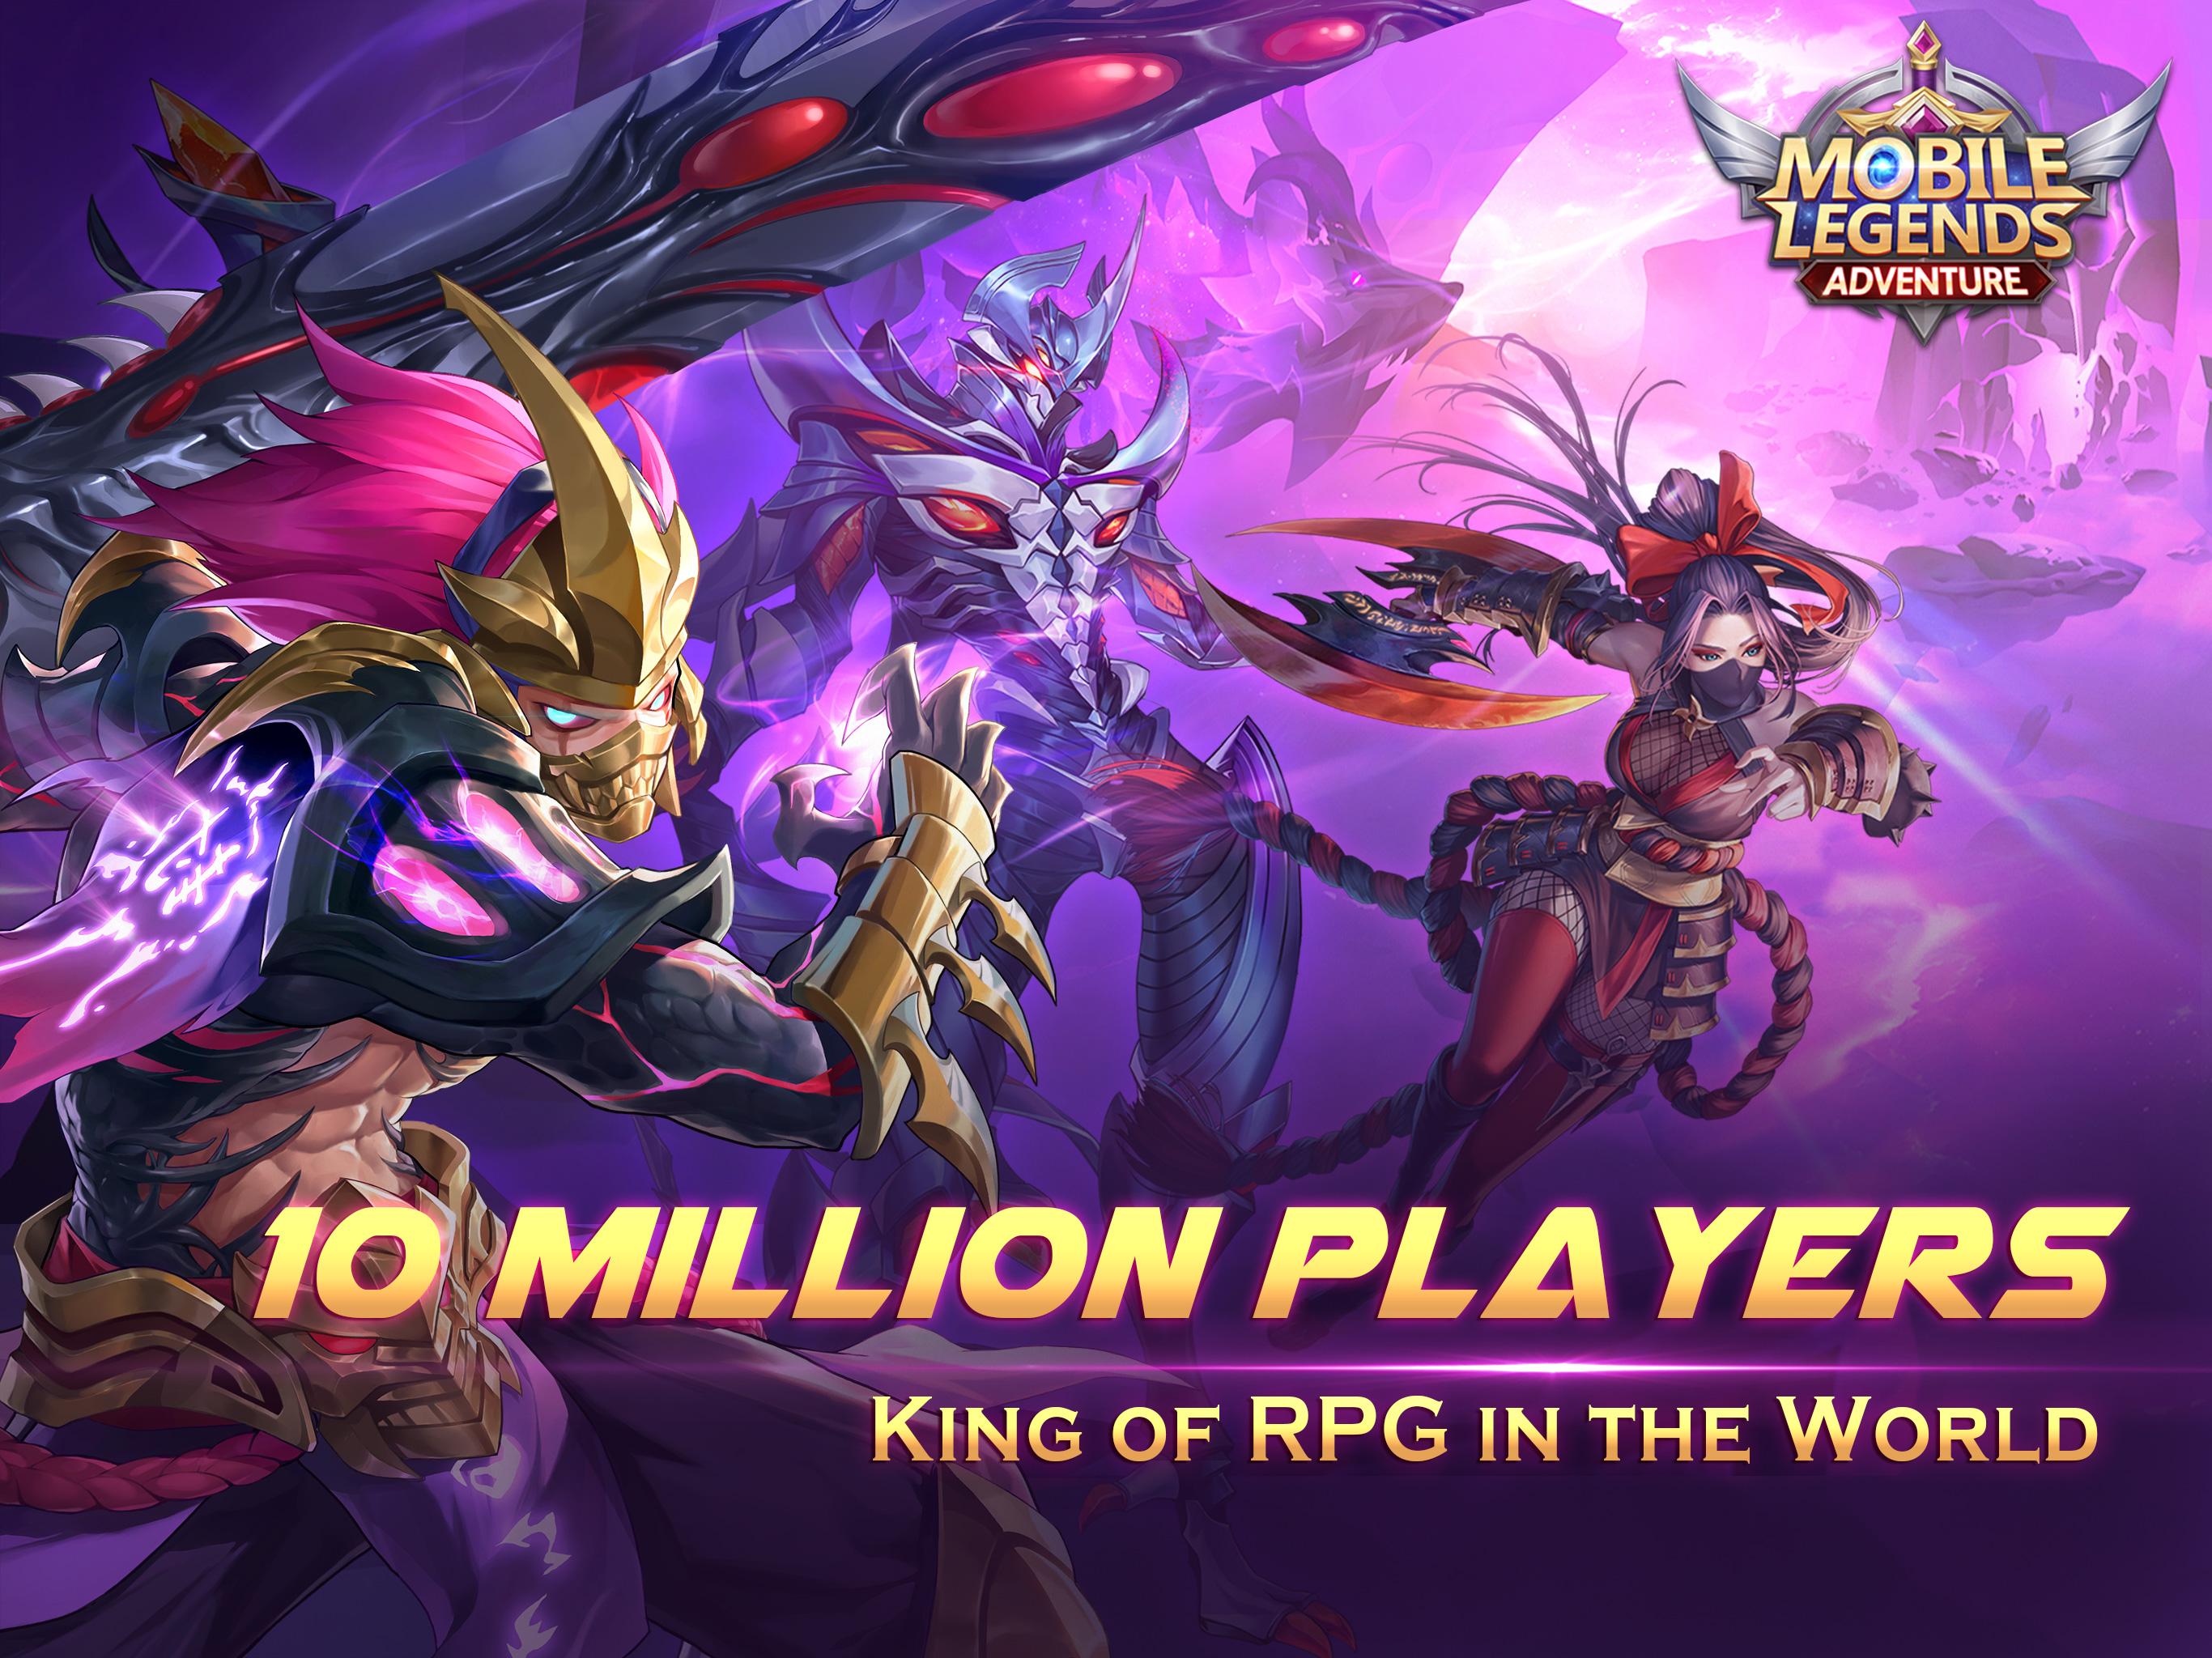 Mobile Legends: Adventure for Android - APK Download